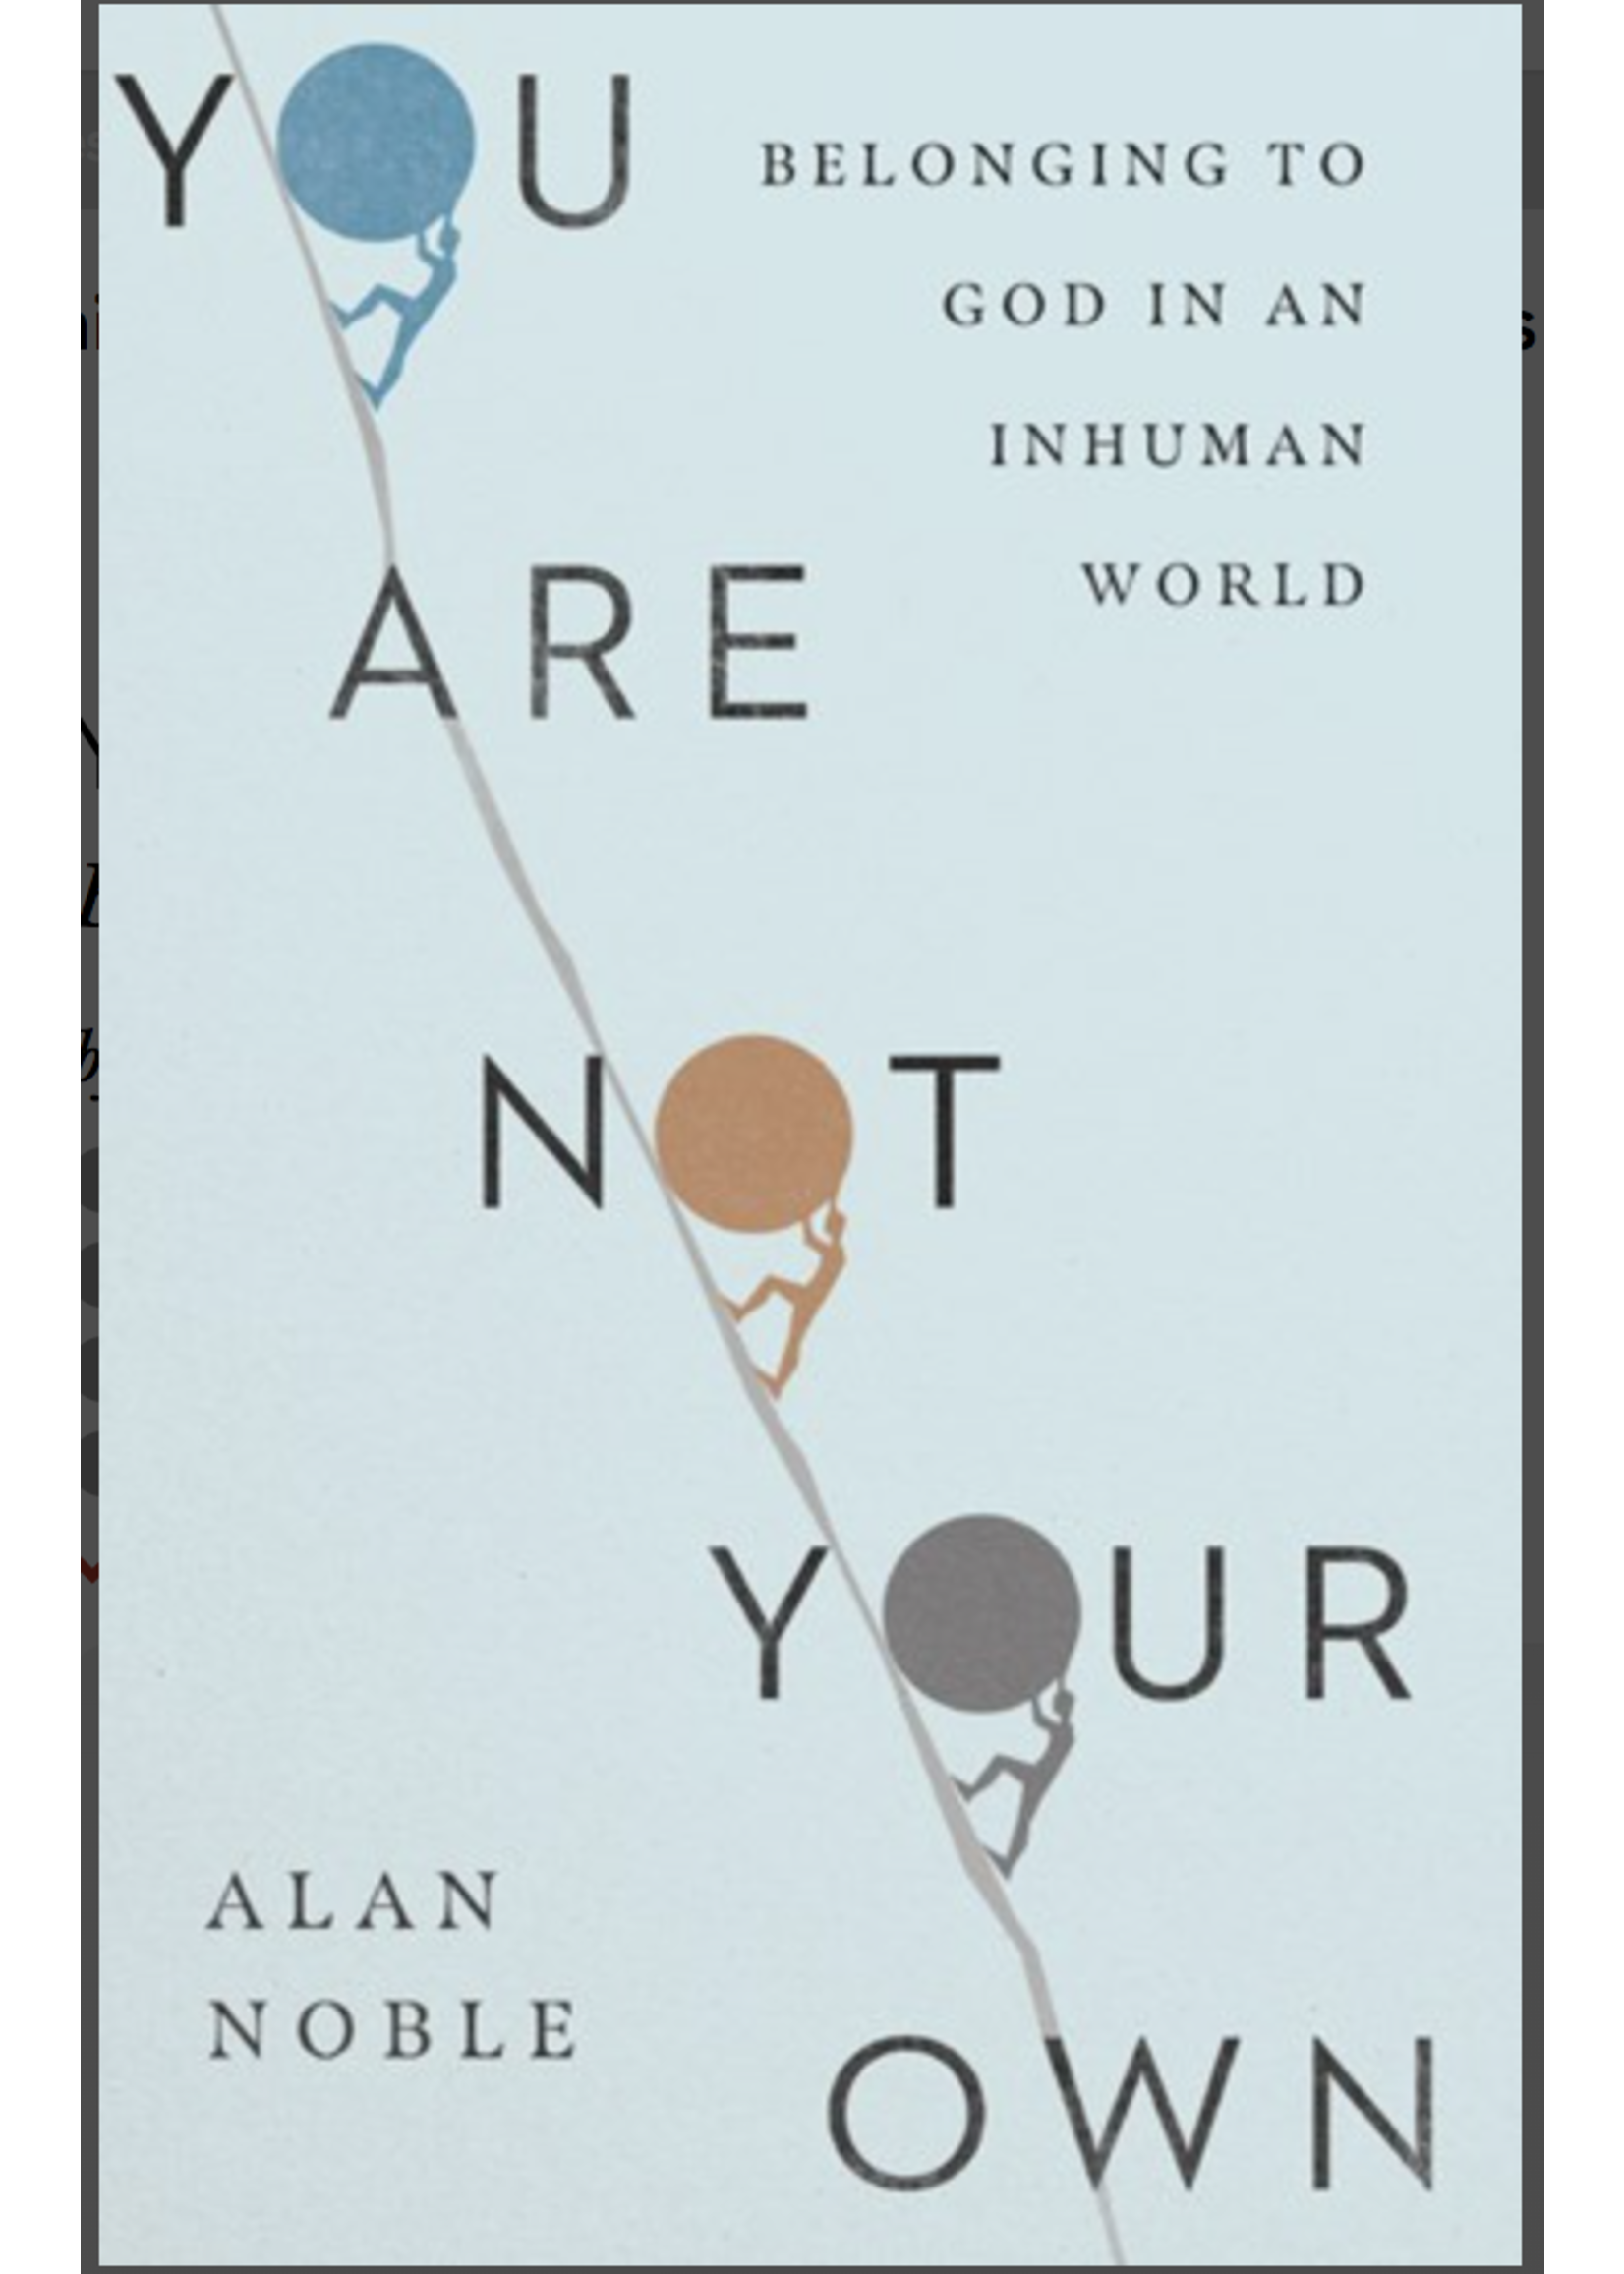 Noble, Alan You Are Not Your Own: Belonging to God in an Inhuman World [Alan Noble]